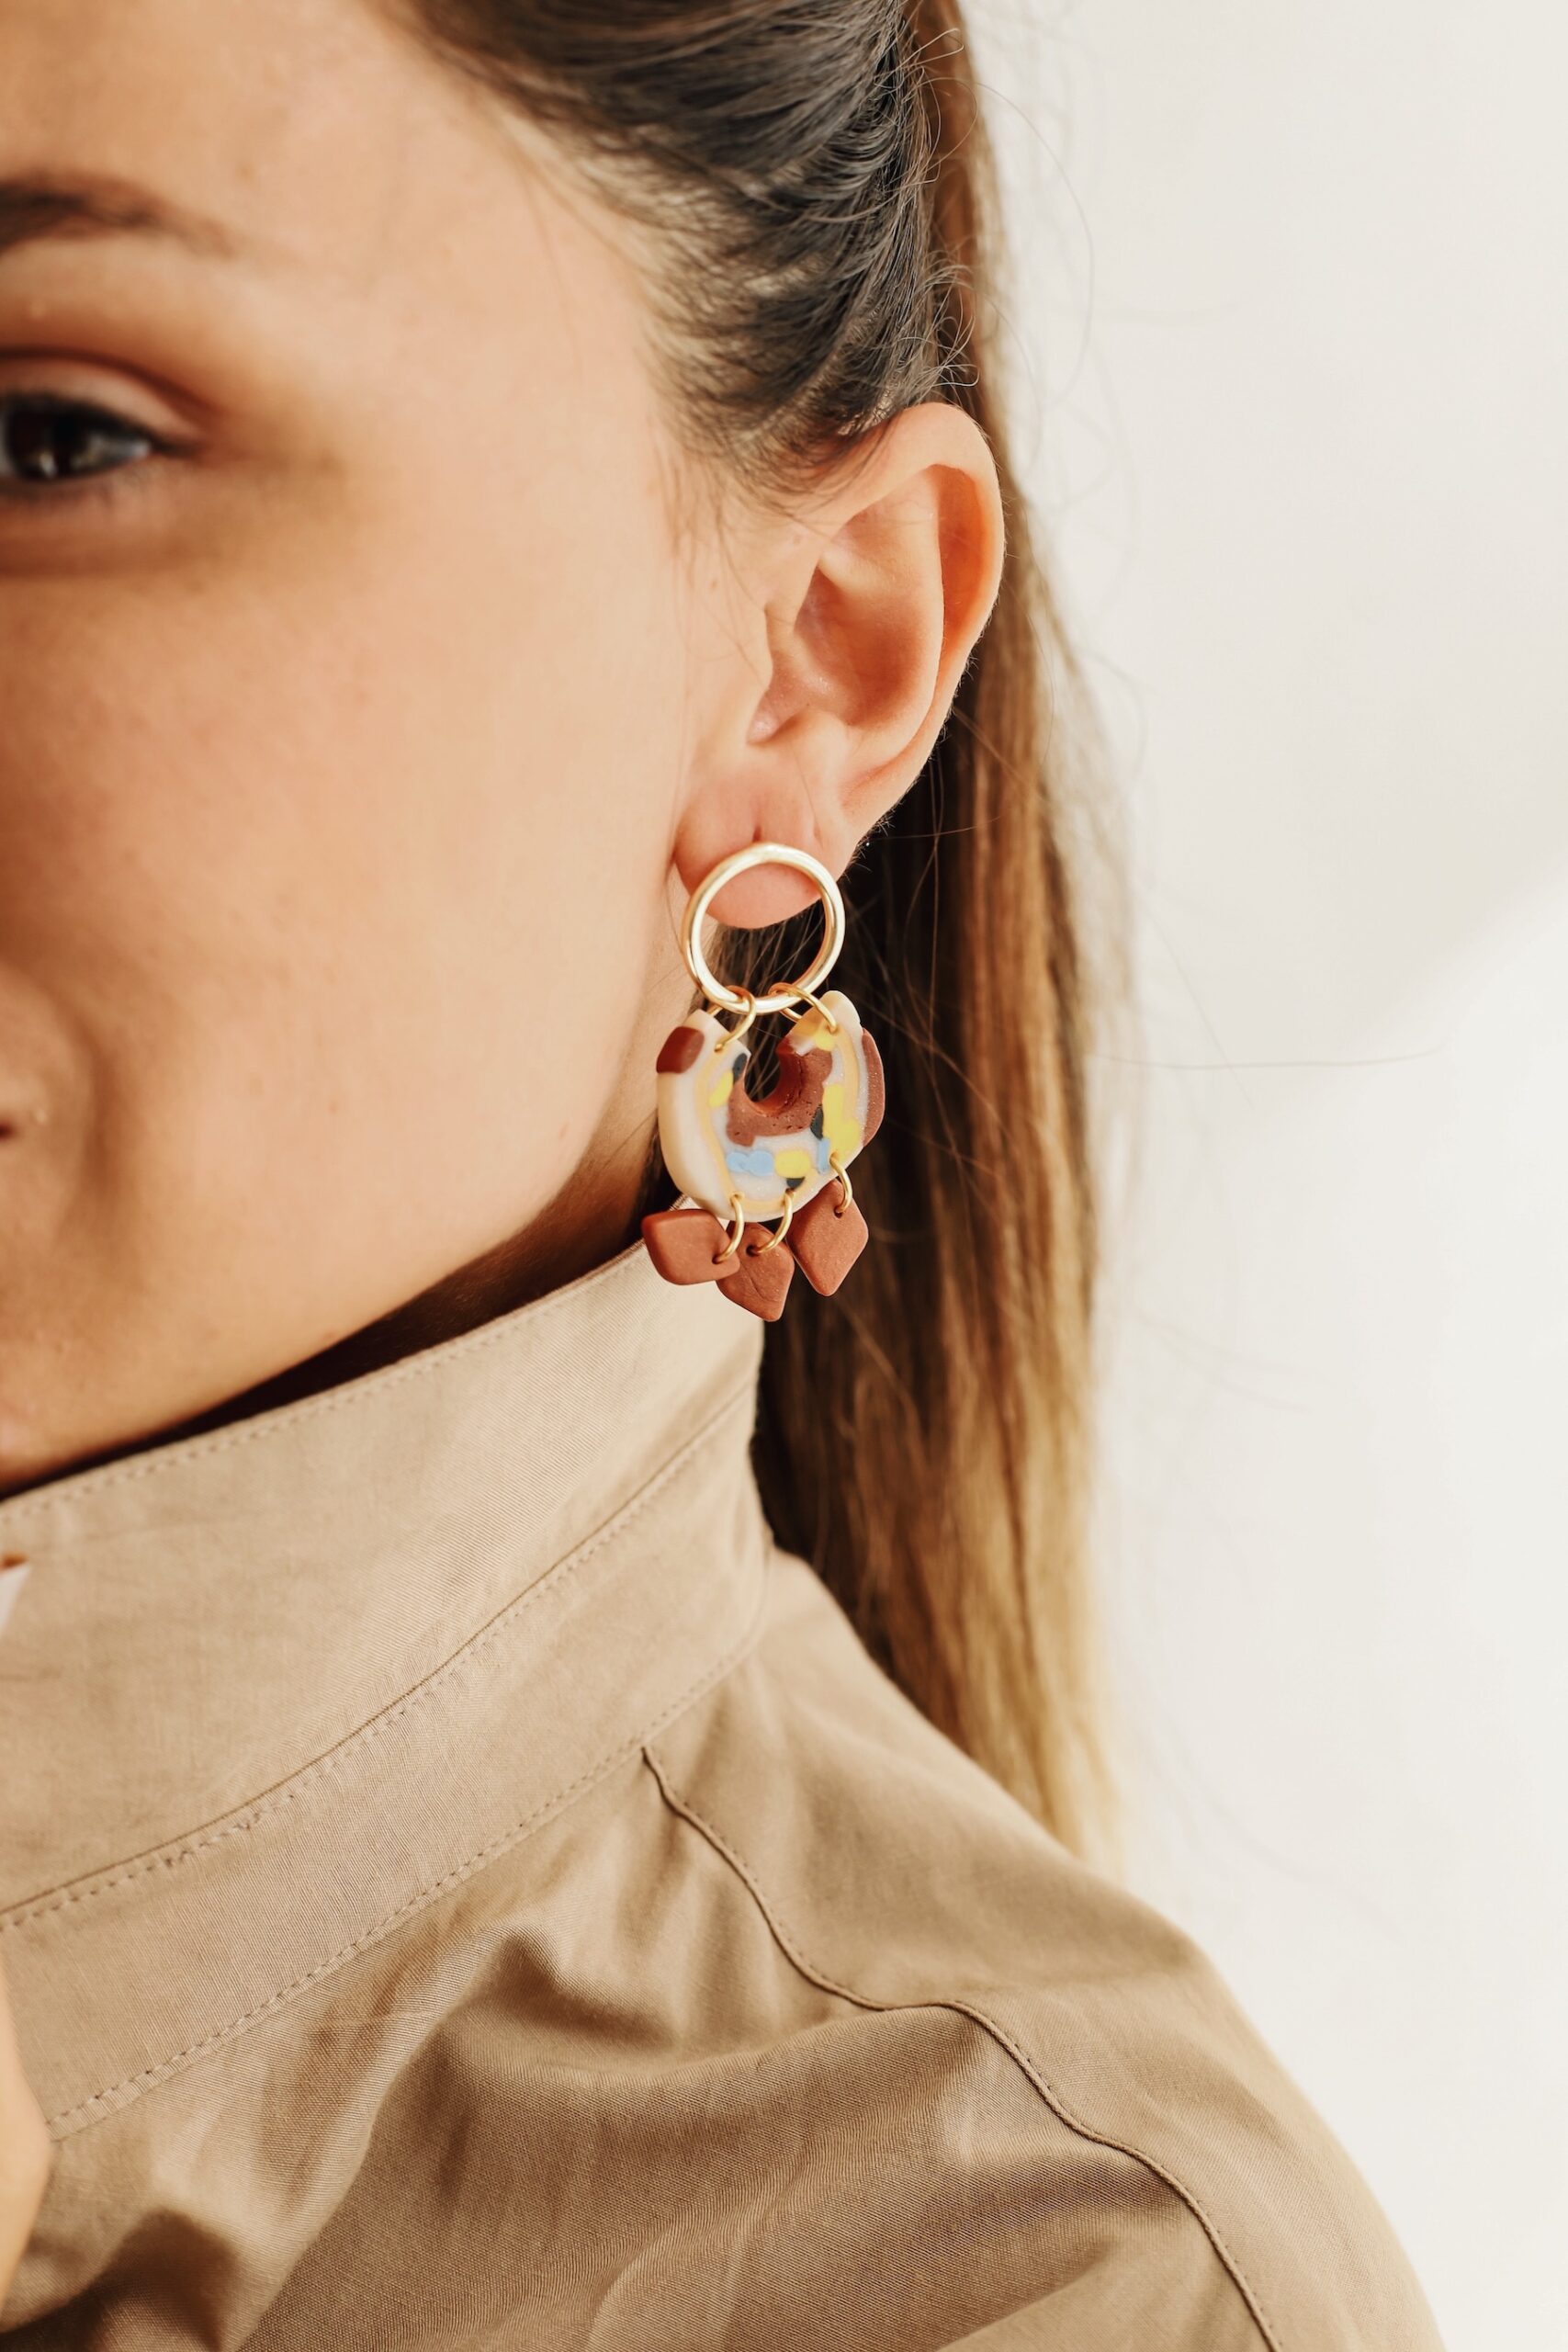 Carmen is an earring was designed by a handmade woman designer. It was made of clay